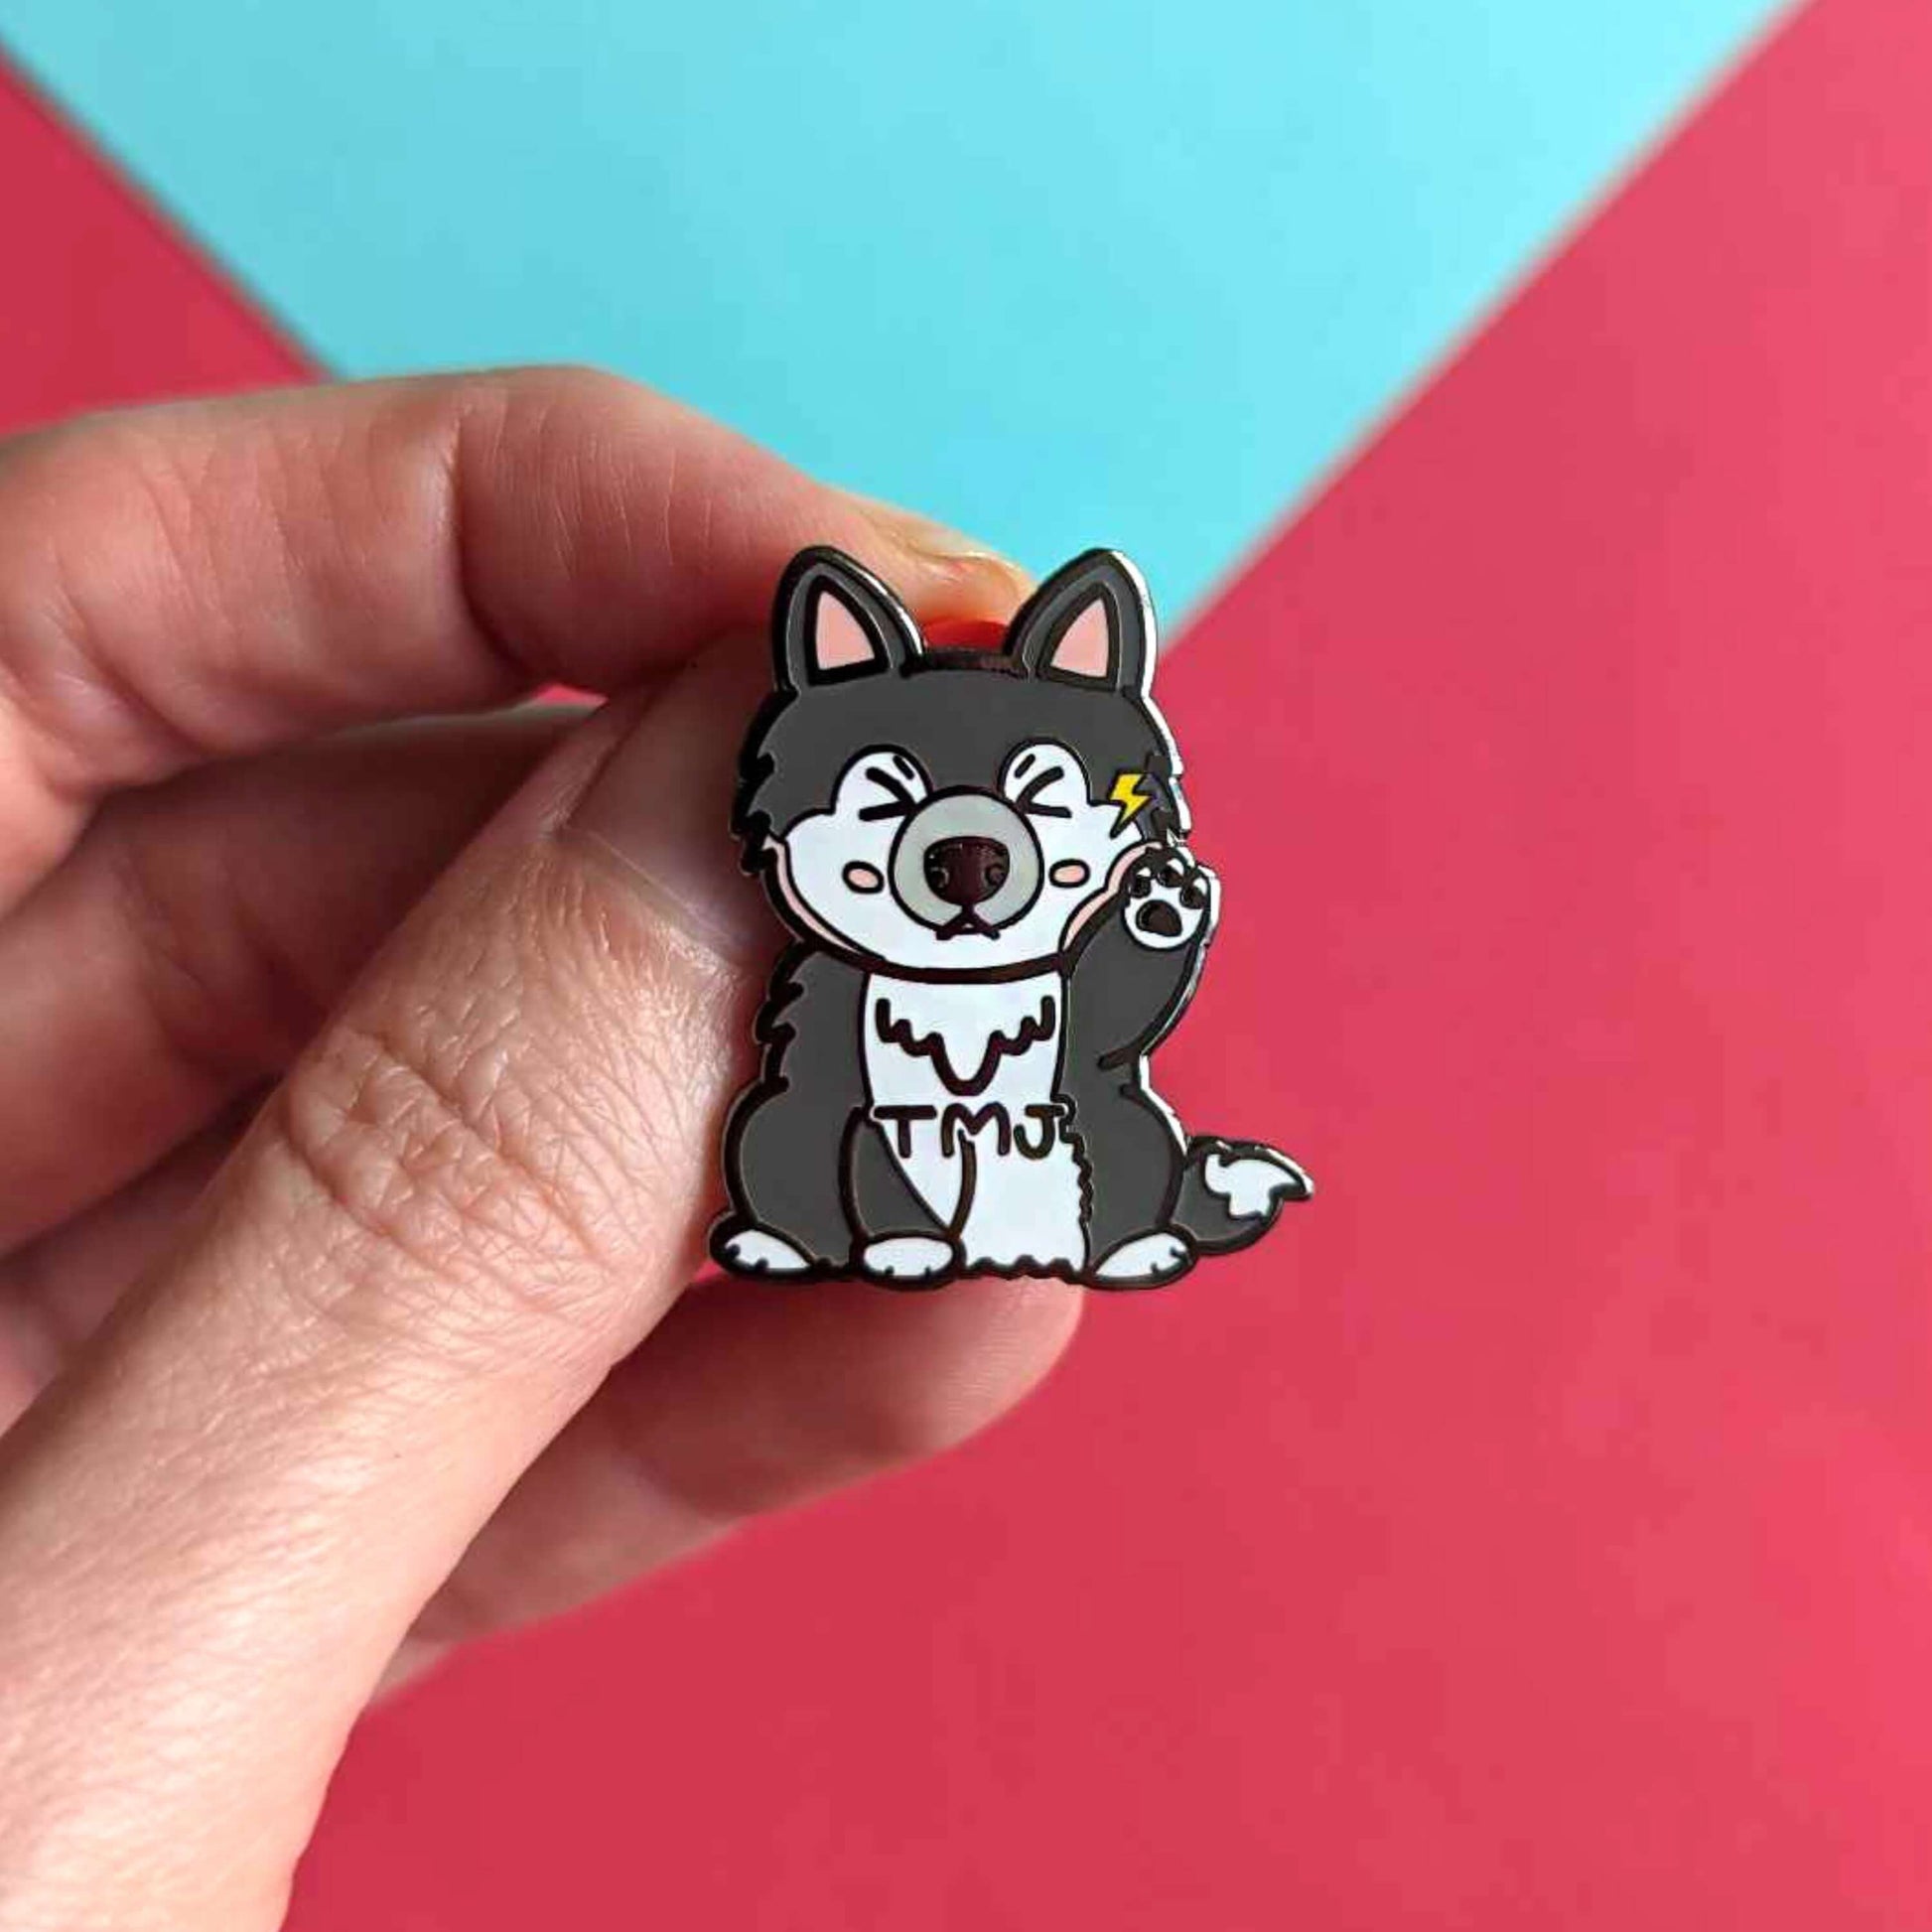 The Tempawromandibular Disorder Dog Enamel Pin - Temporomandibular Disorder TMJ being held over a blue and red background. The grey husky dog shaped enamel pin has a pained face with shut eyes, one paw up by its jaw with a yellow lightning bolt and black text across its chest reading 'TMJ'. The hand drawn design is raising awareness for Temporomandibular Disorder TMJ.